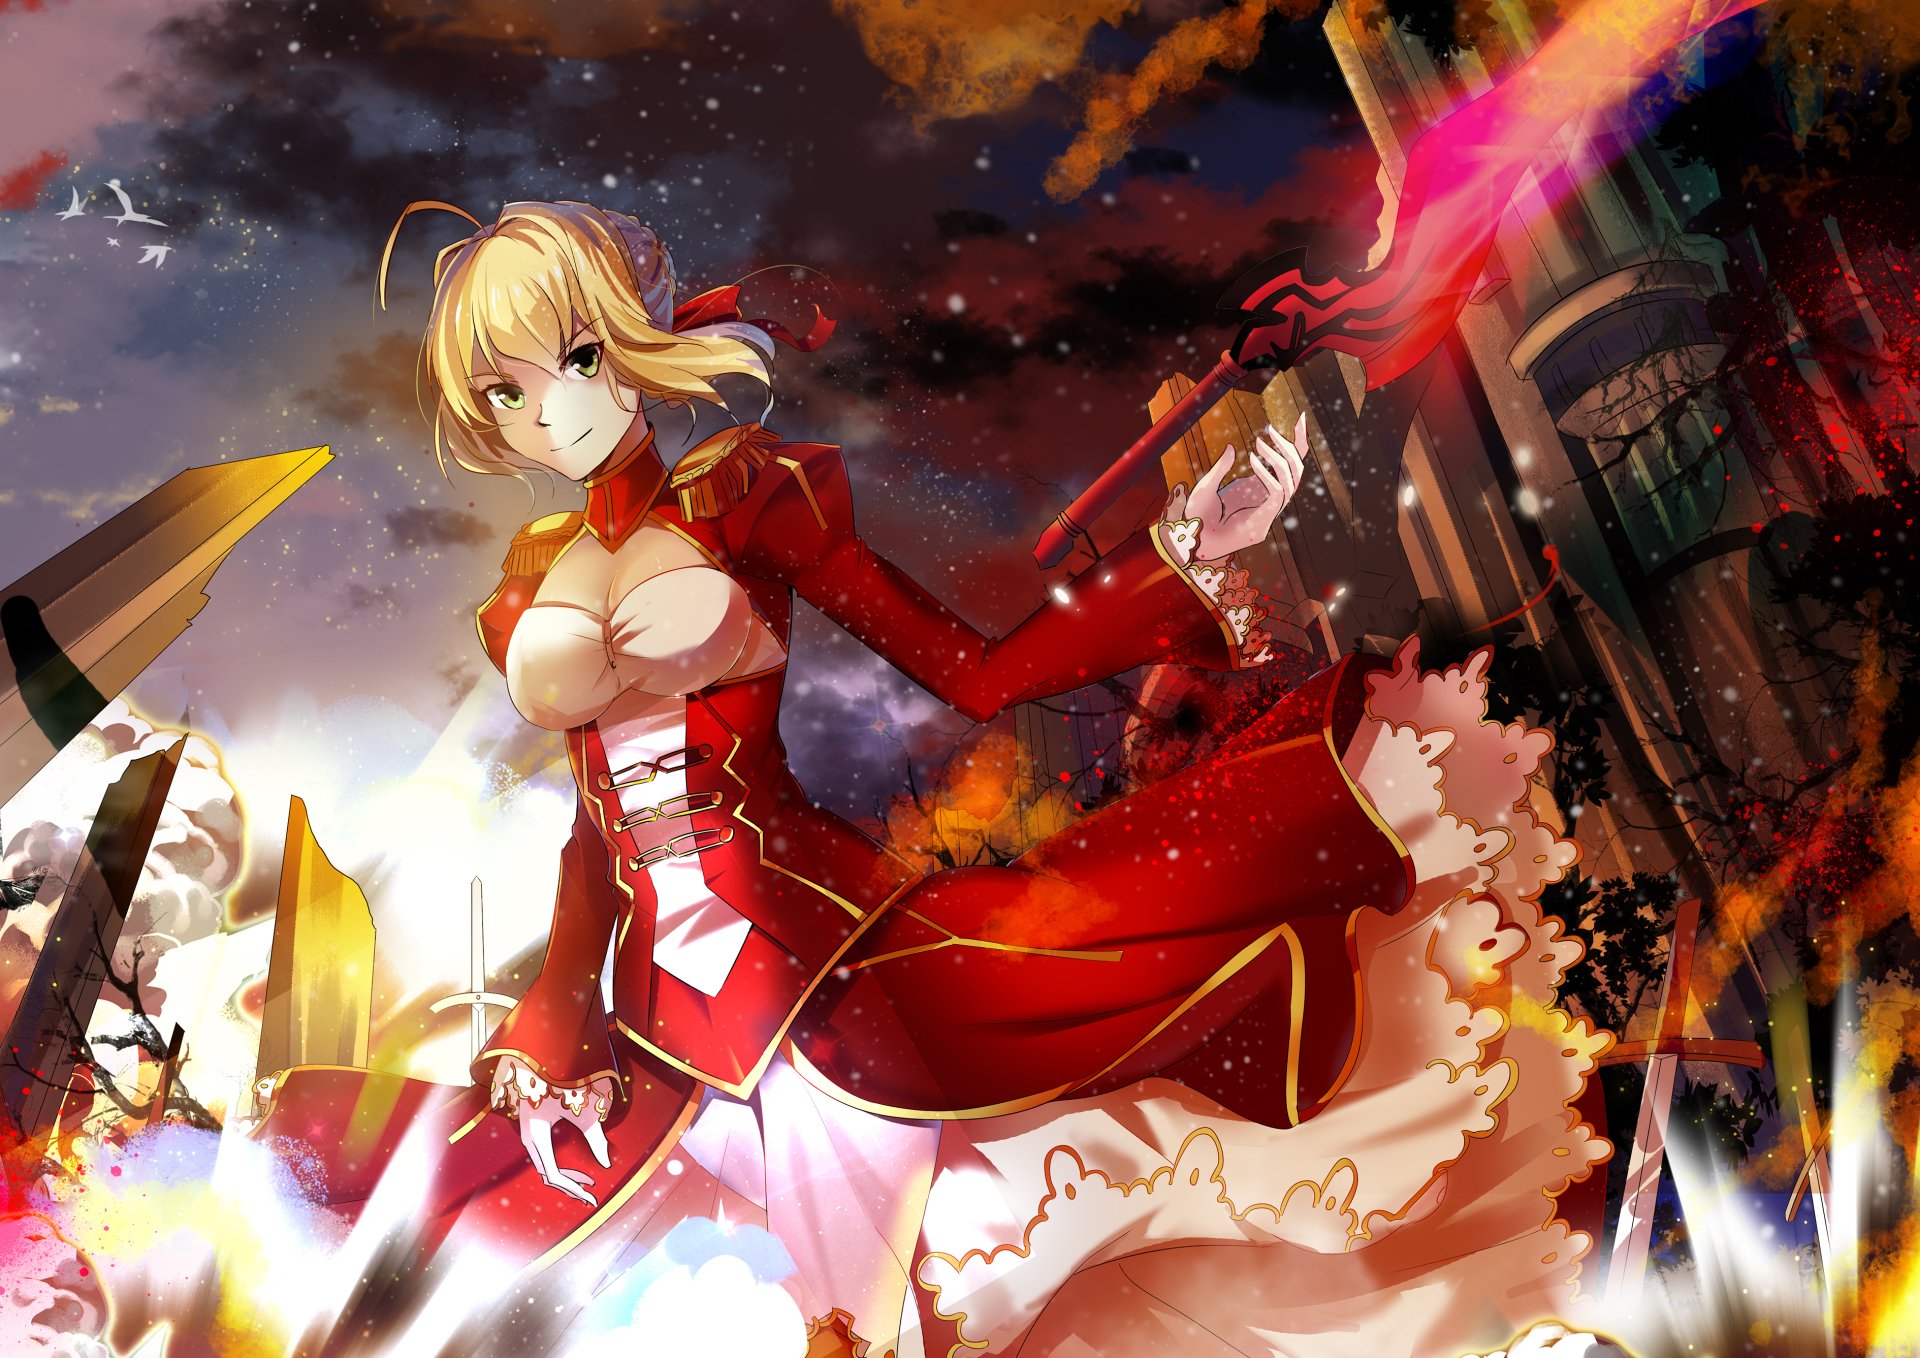 Download Red Saber Anime Fate/extra HD Wallpaper